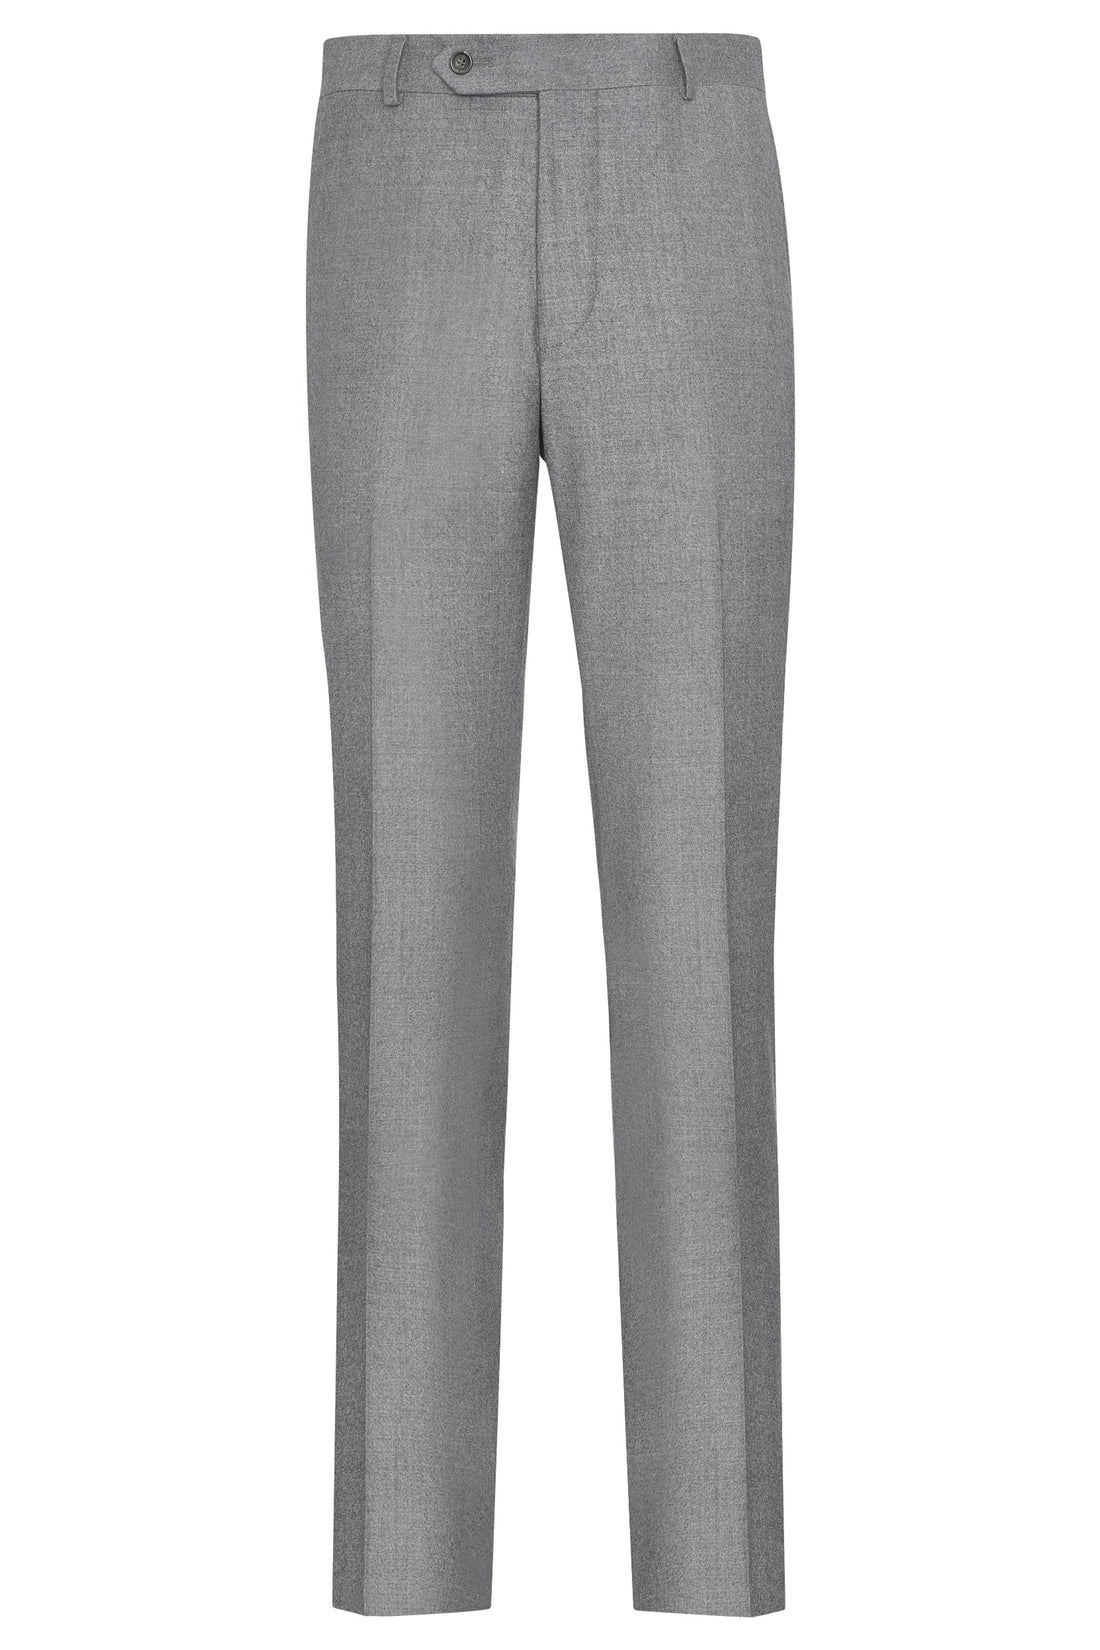 Light Grey Ice Flannel Flat Front Trousers